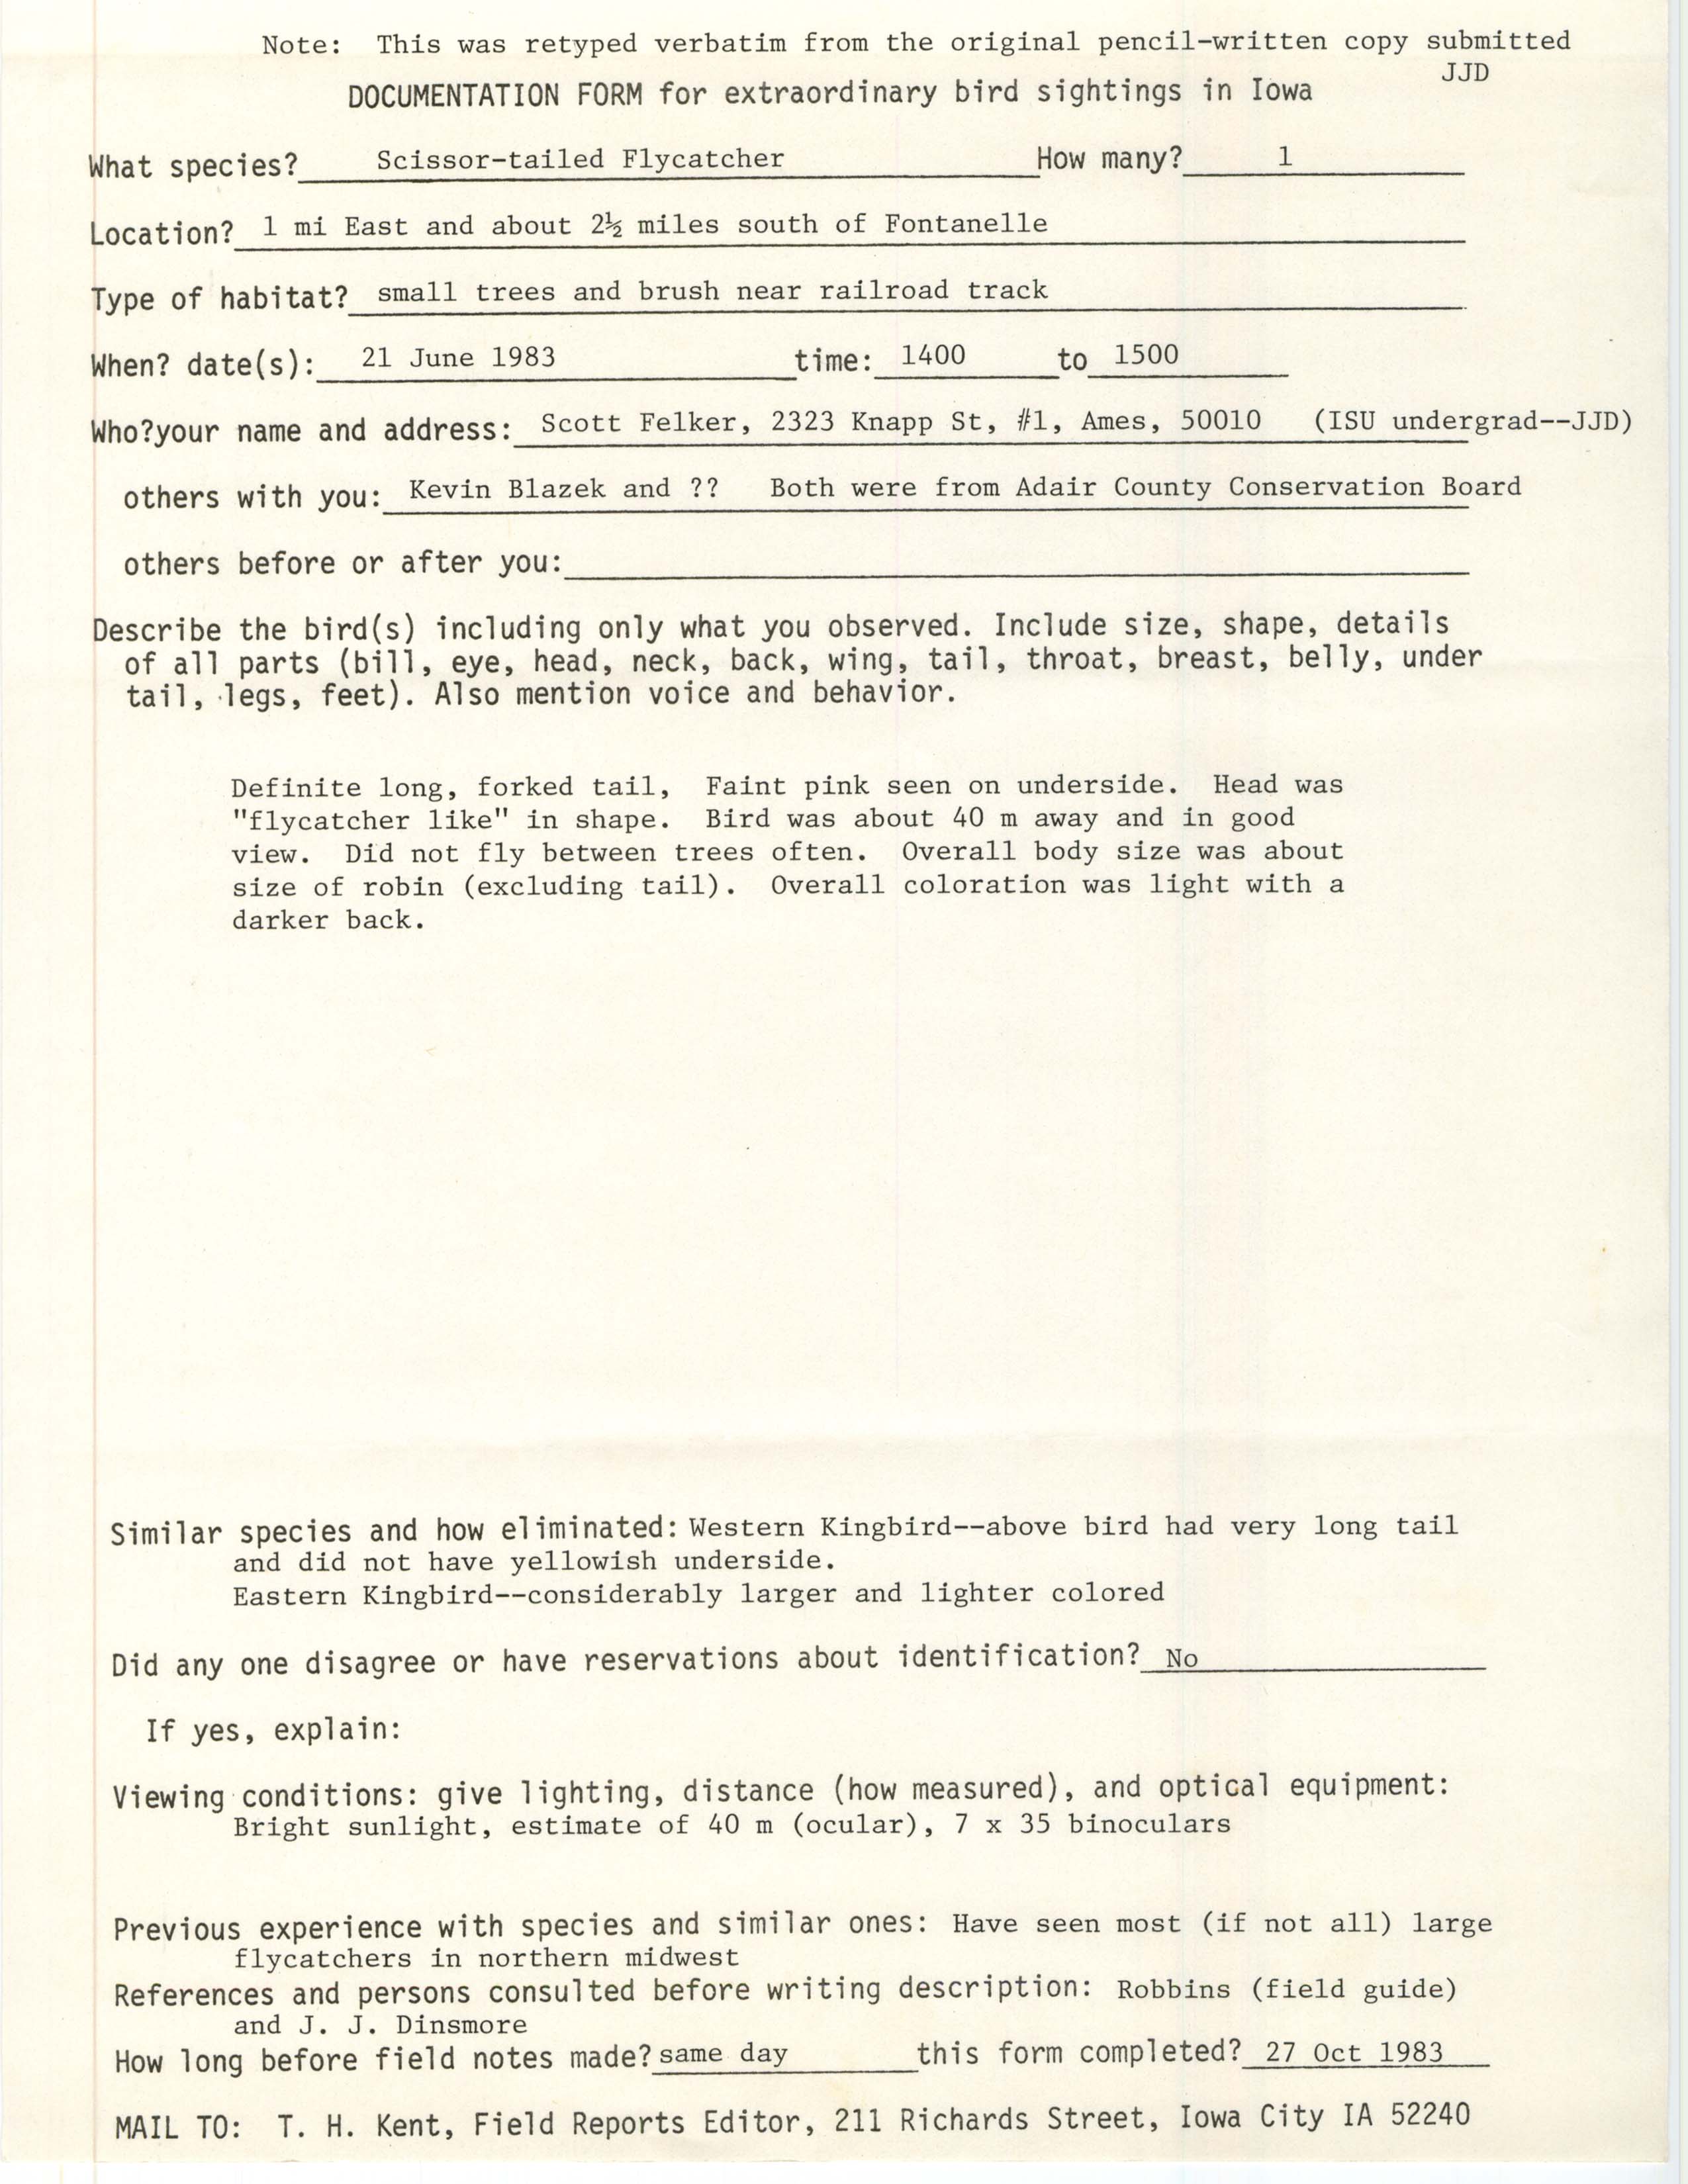 Rare bird documentation form for Scissor-tailed Flycatcher east and south of Fontanelle, 1983